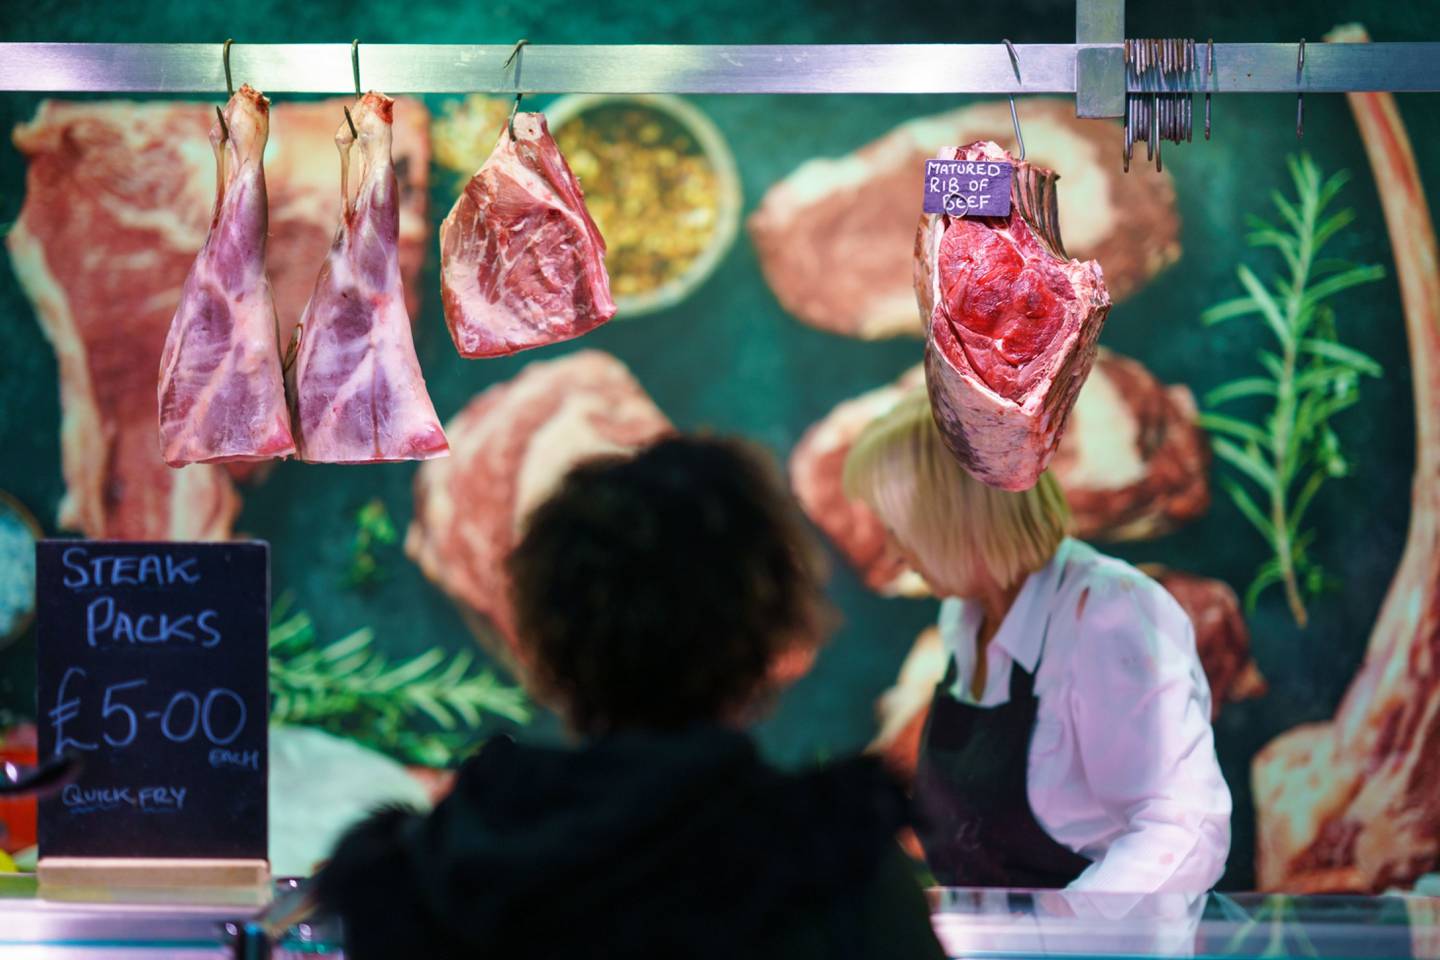 A customer shops at a butcher's stall in Sheffield, UK.dfd